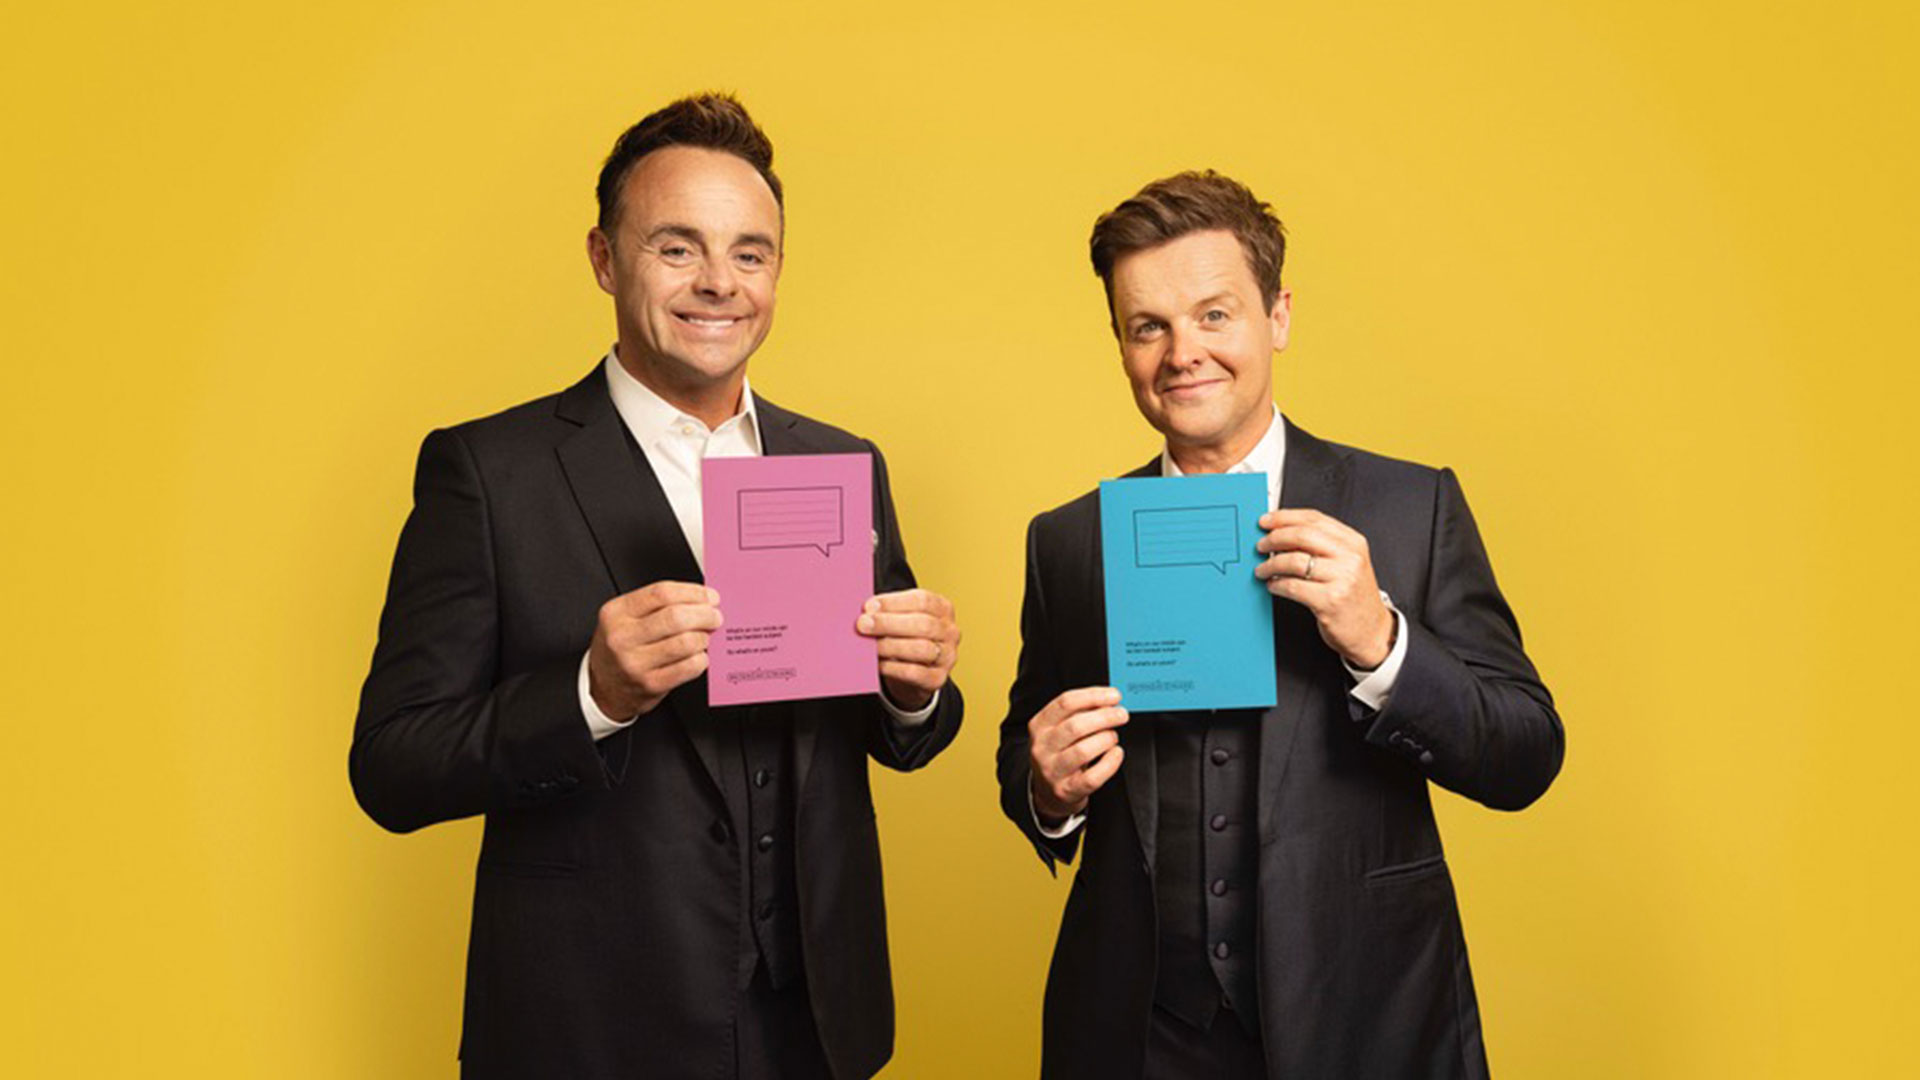 Ant and Dec are standing side by side against a bright yellow background. They are holding pink and blue school jotters. On the front page, there is an image of a speech bubble with lines.